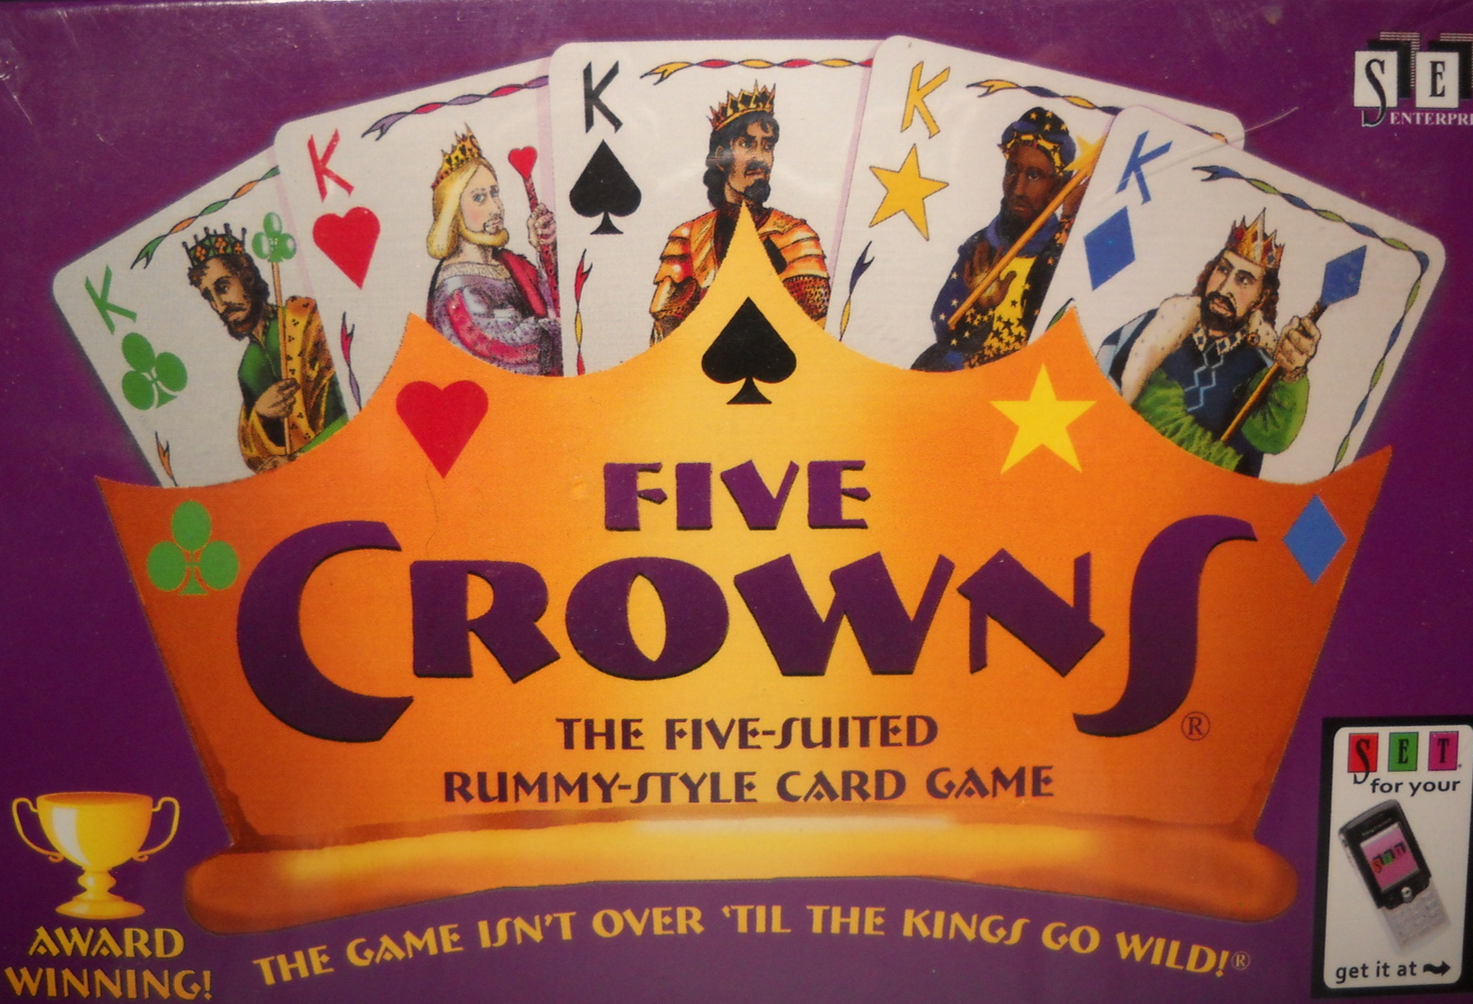 SEALED The Five-Suited Rummy-Style Card Game NEW Five Crowns 